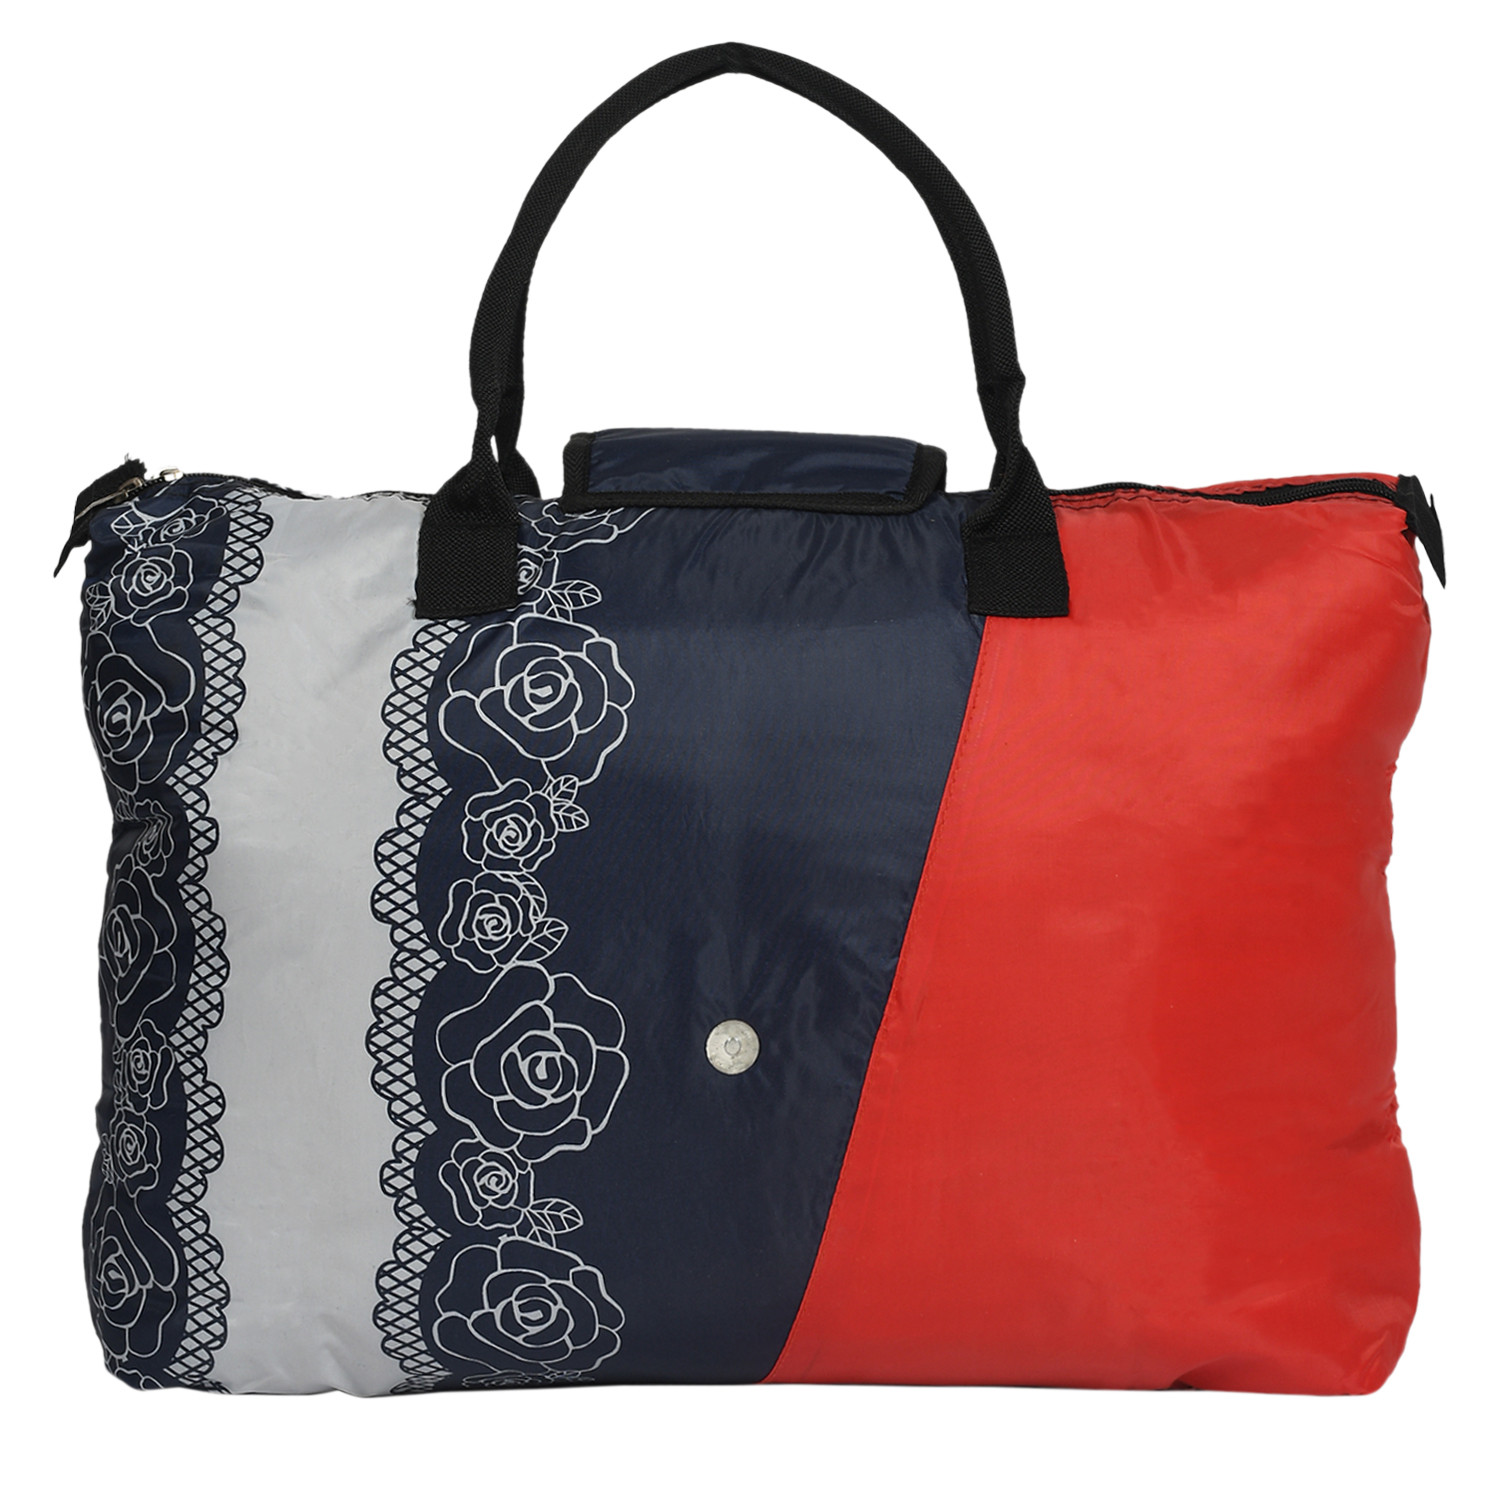 Kuber Industries Parachute Floral Print Shoulder Bag/Shopping Bag For Home & Travling With Handle (Red) 54KM4192